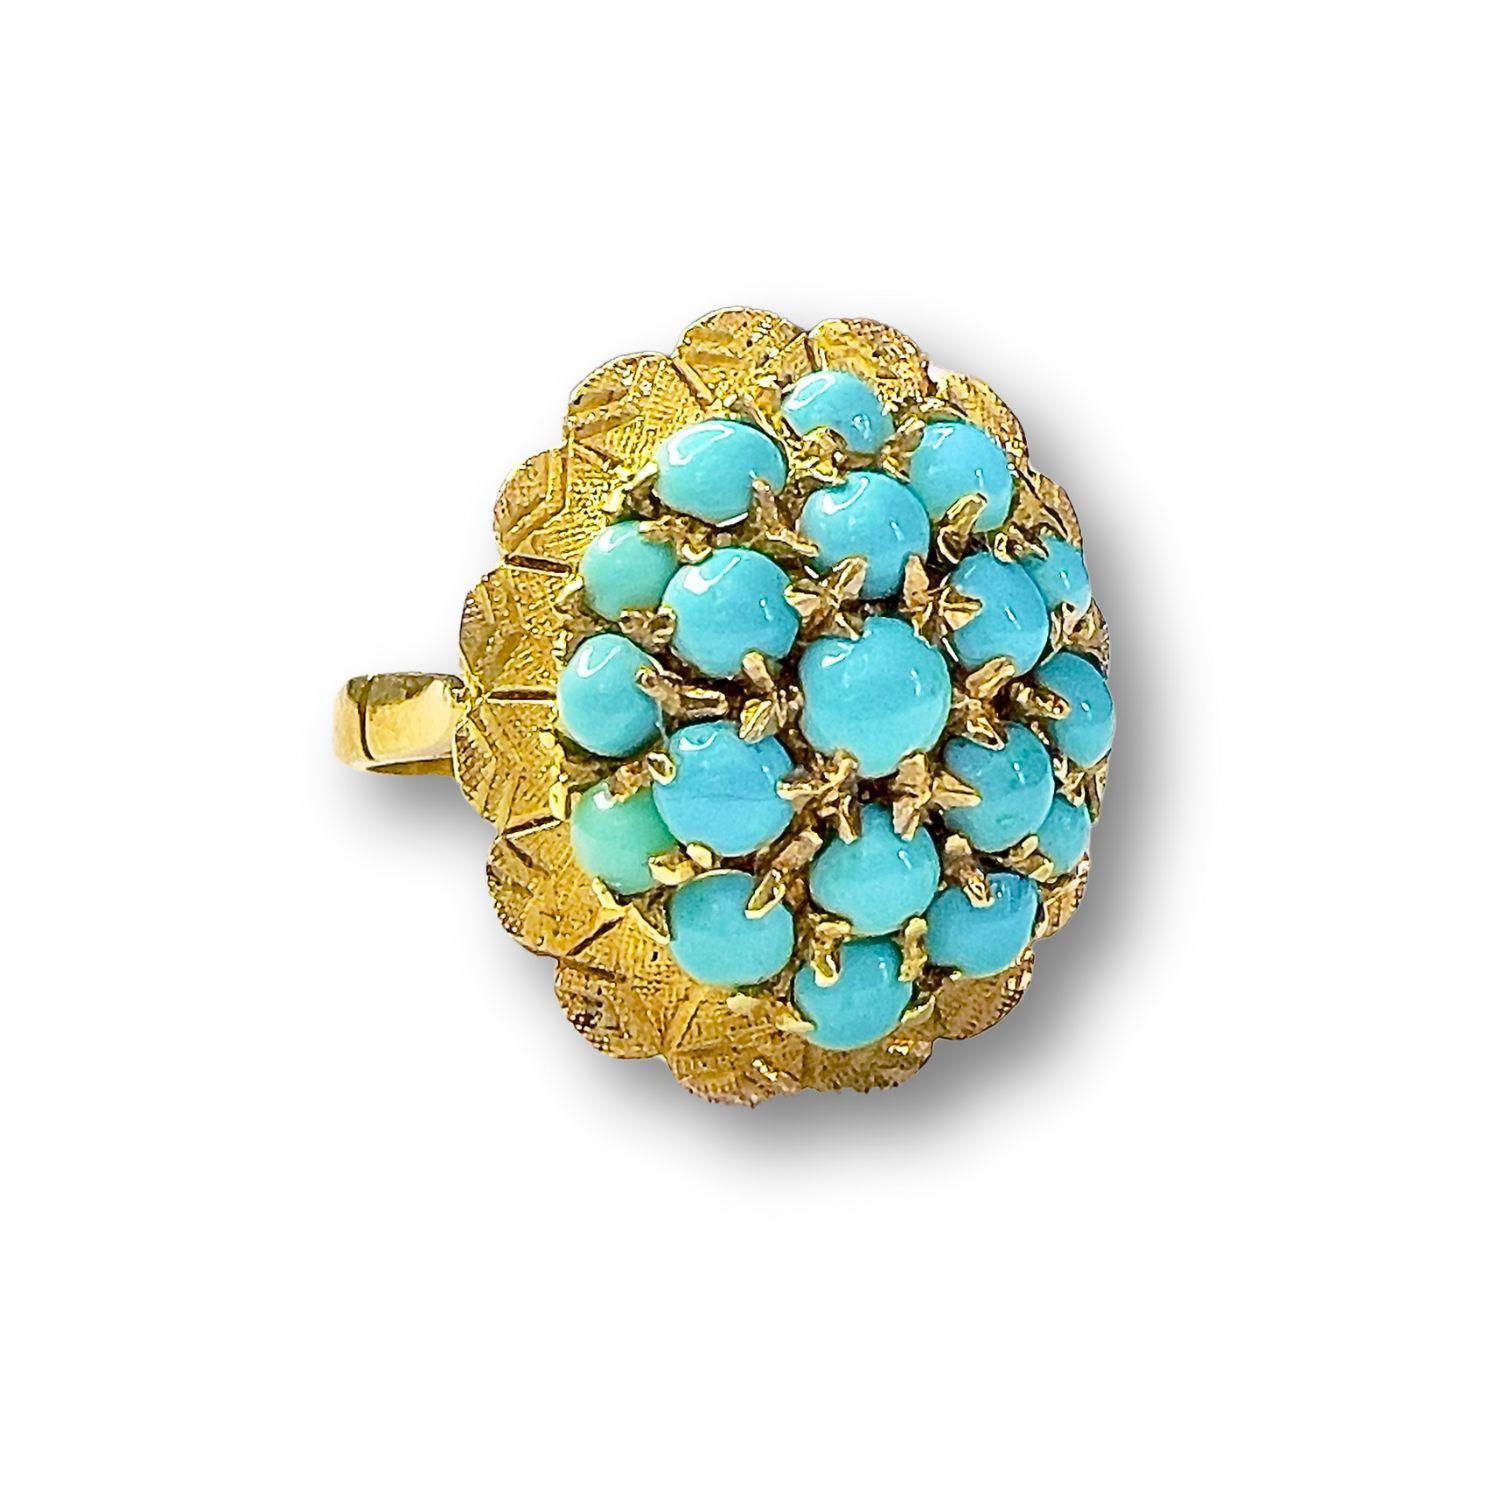 Transport yourself back to the glamorous 1940s with this exquisite inspiration retro design ring, crafted from 18-karat yellow gold and adorned with a captivating turquoise cabochon. The unique combination of vintage charm and timeless elegance